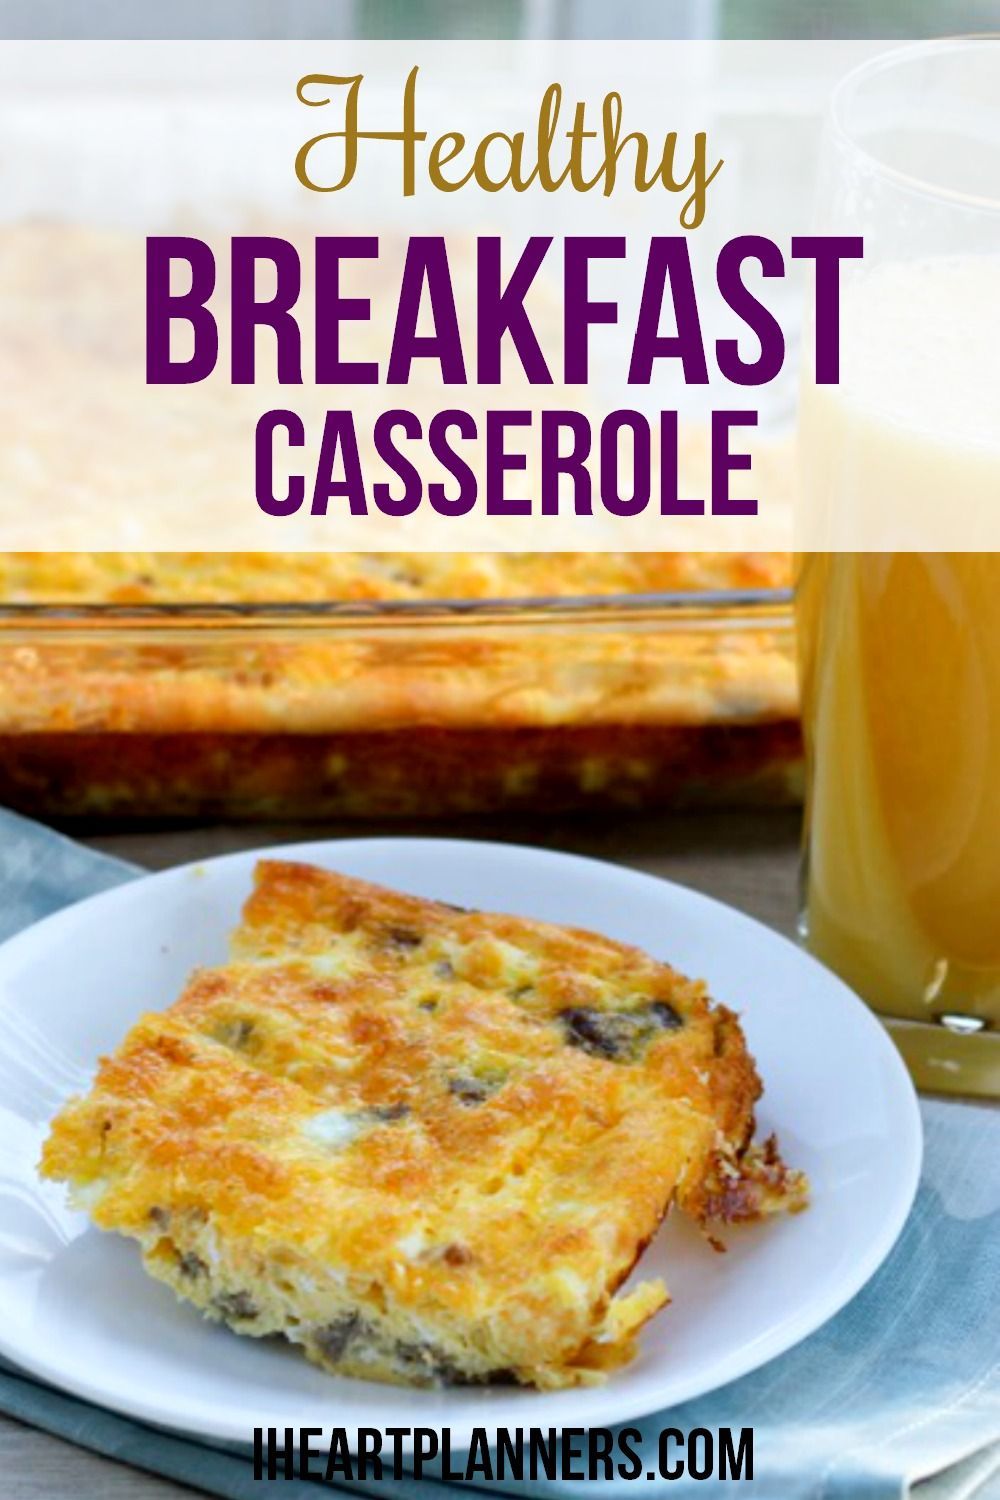 This tasty and healthy breakfast casserole is a great breakfast alternative to cereal. Enjoy this egg and vegetable bake that is